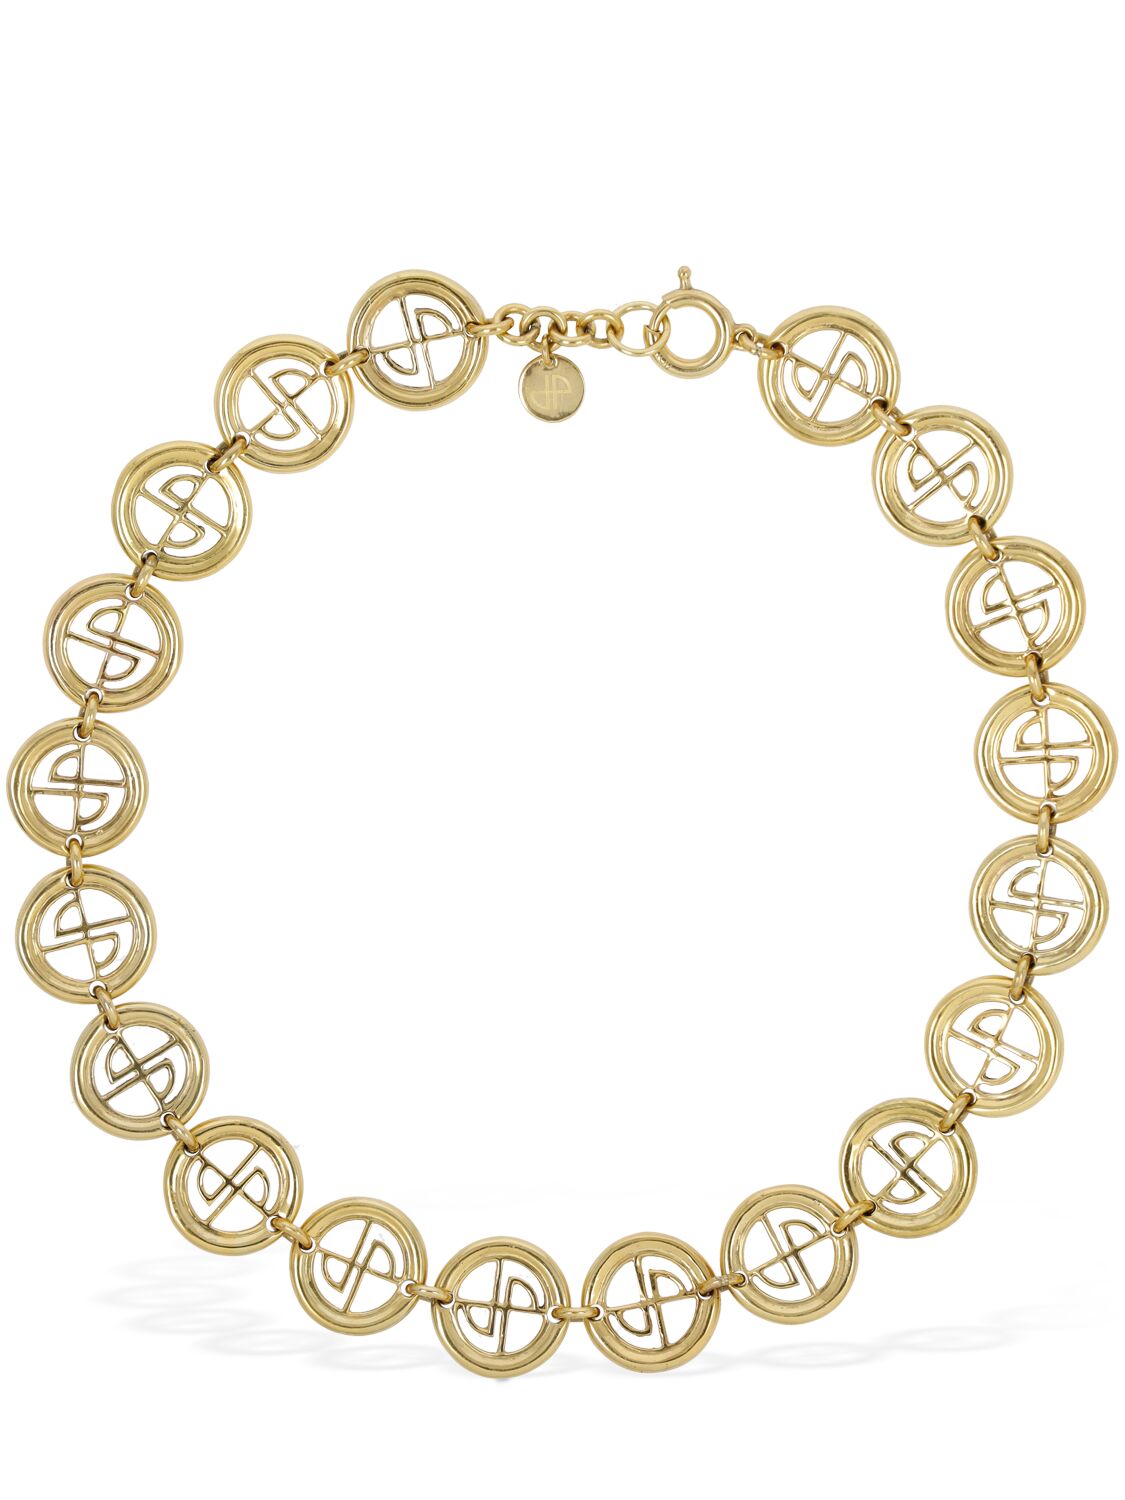 Patou Jp Coin Collar Necklace In Gold